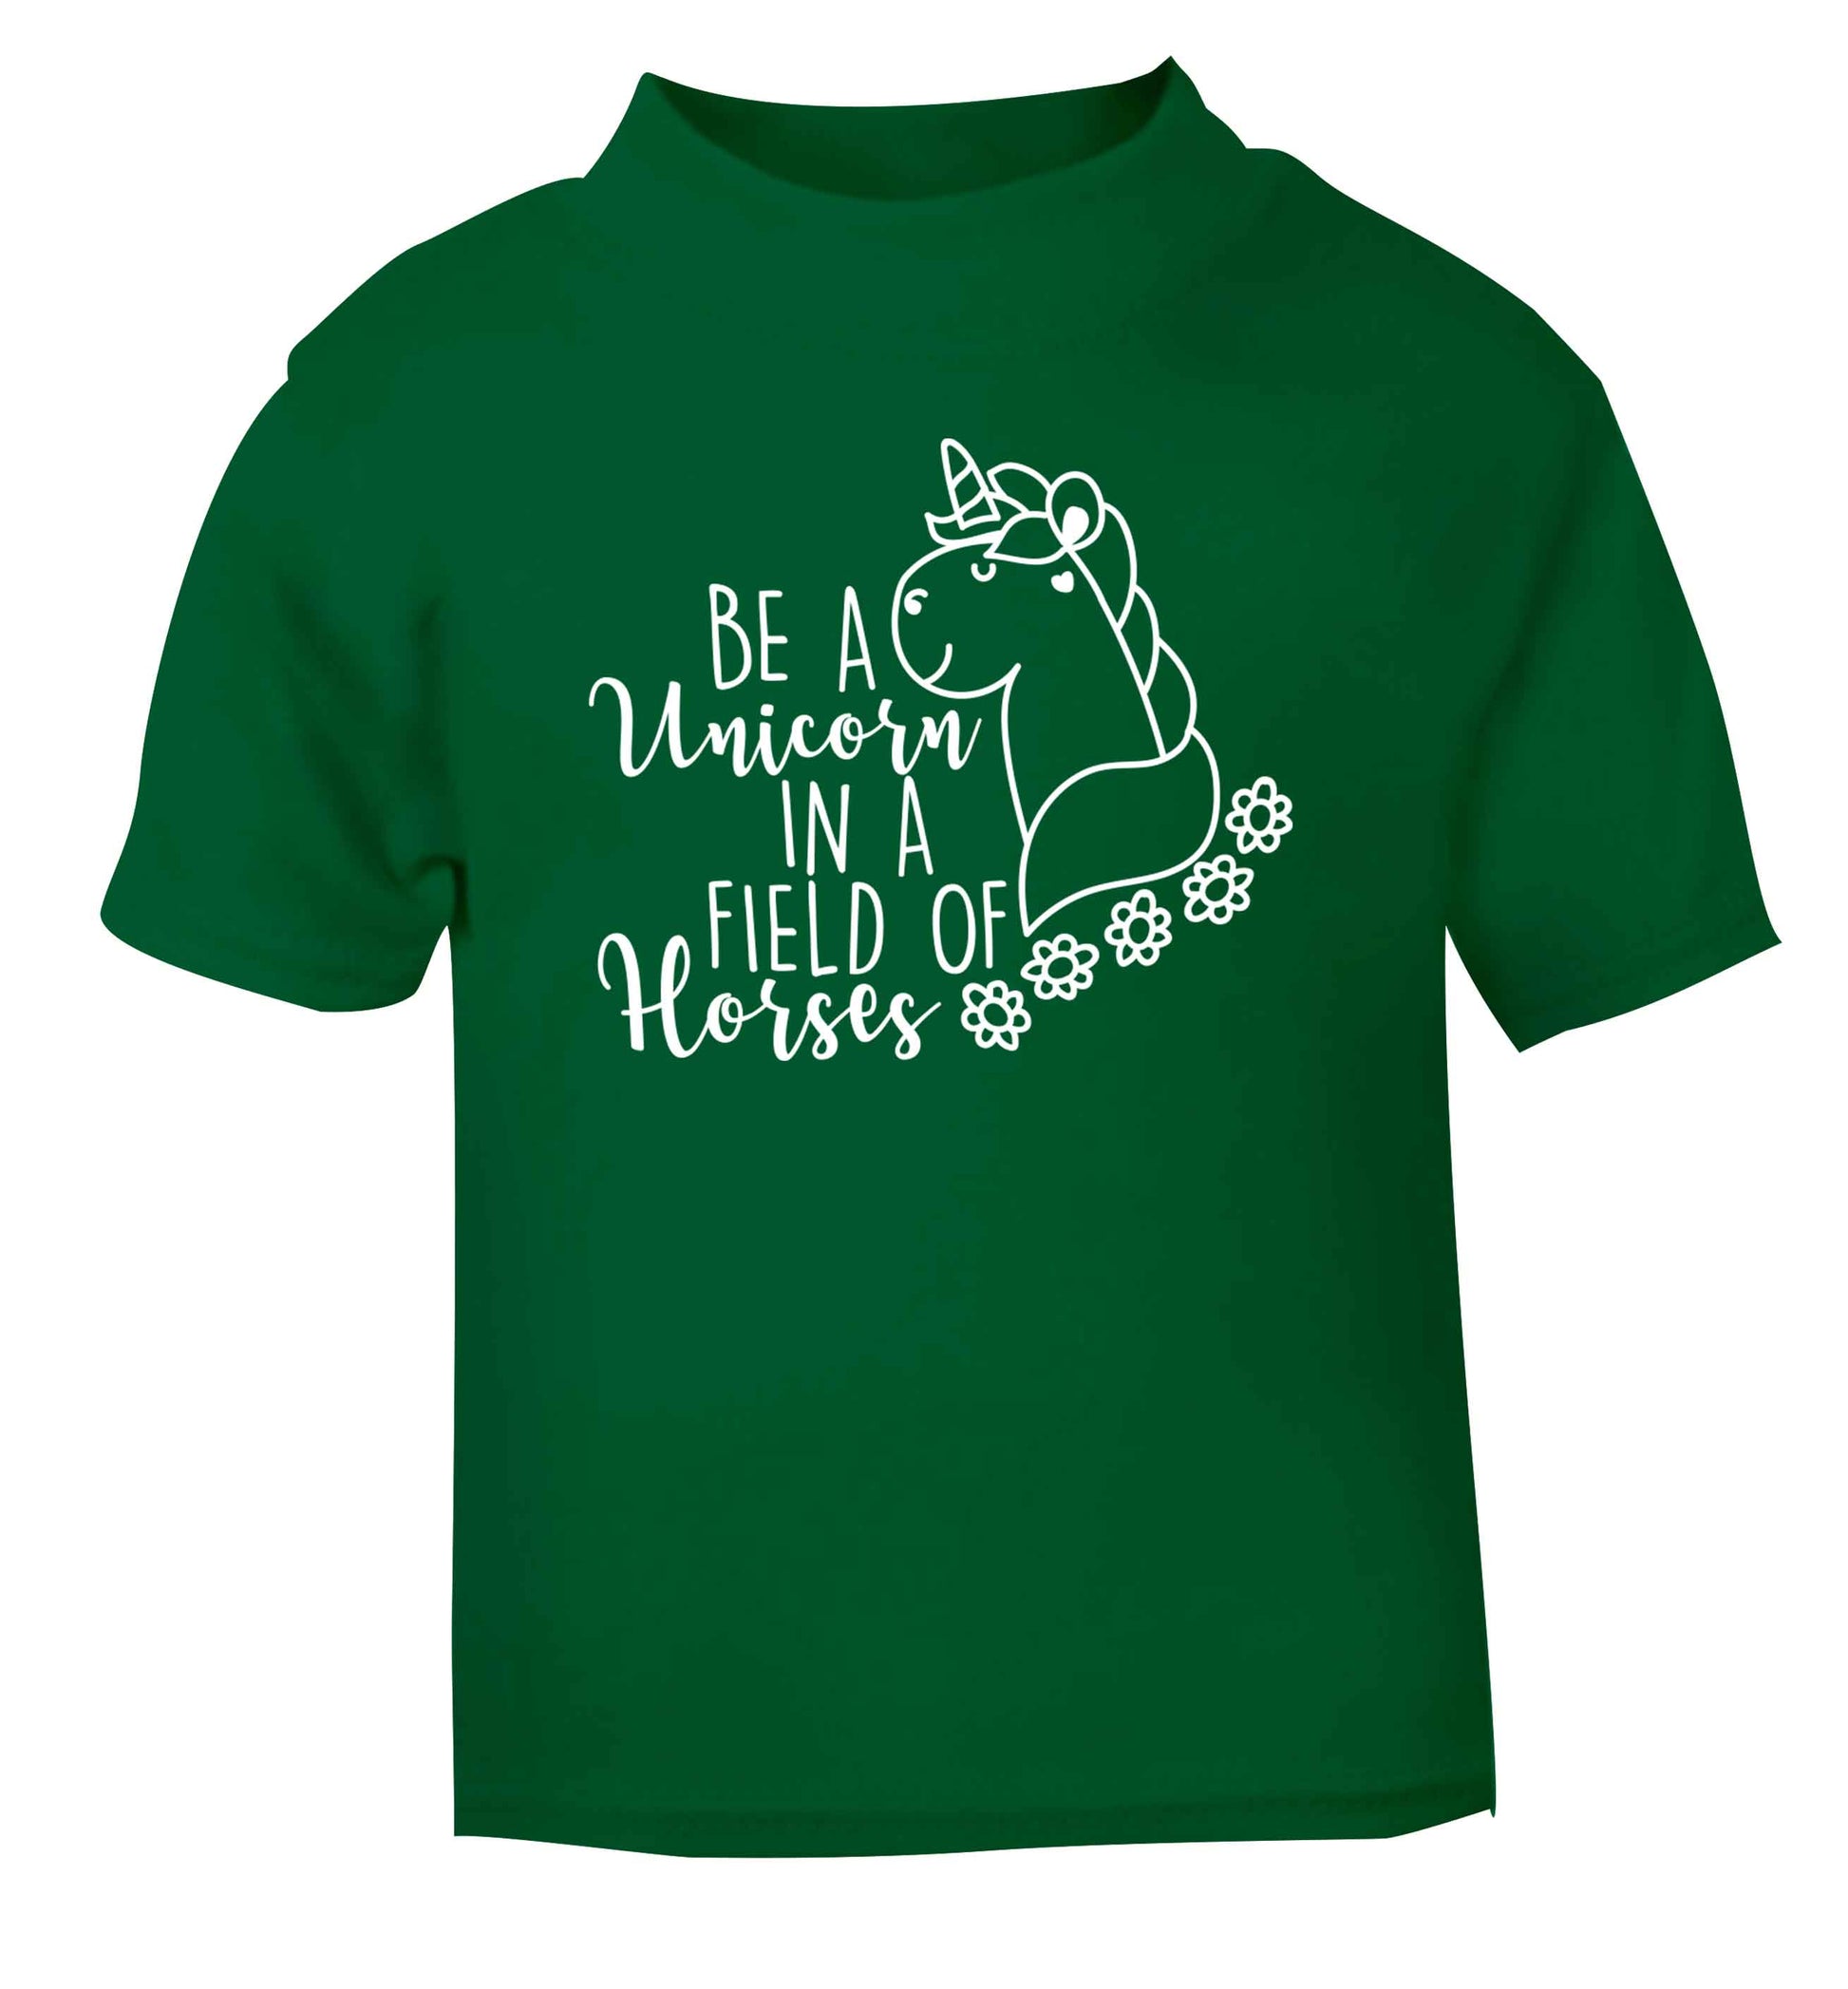 Be a unicorn in a field of horses green Baby Toddler Tshirt 2 Years